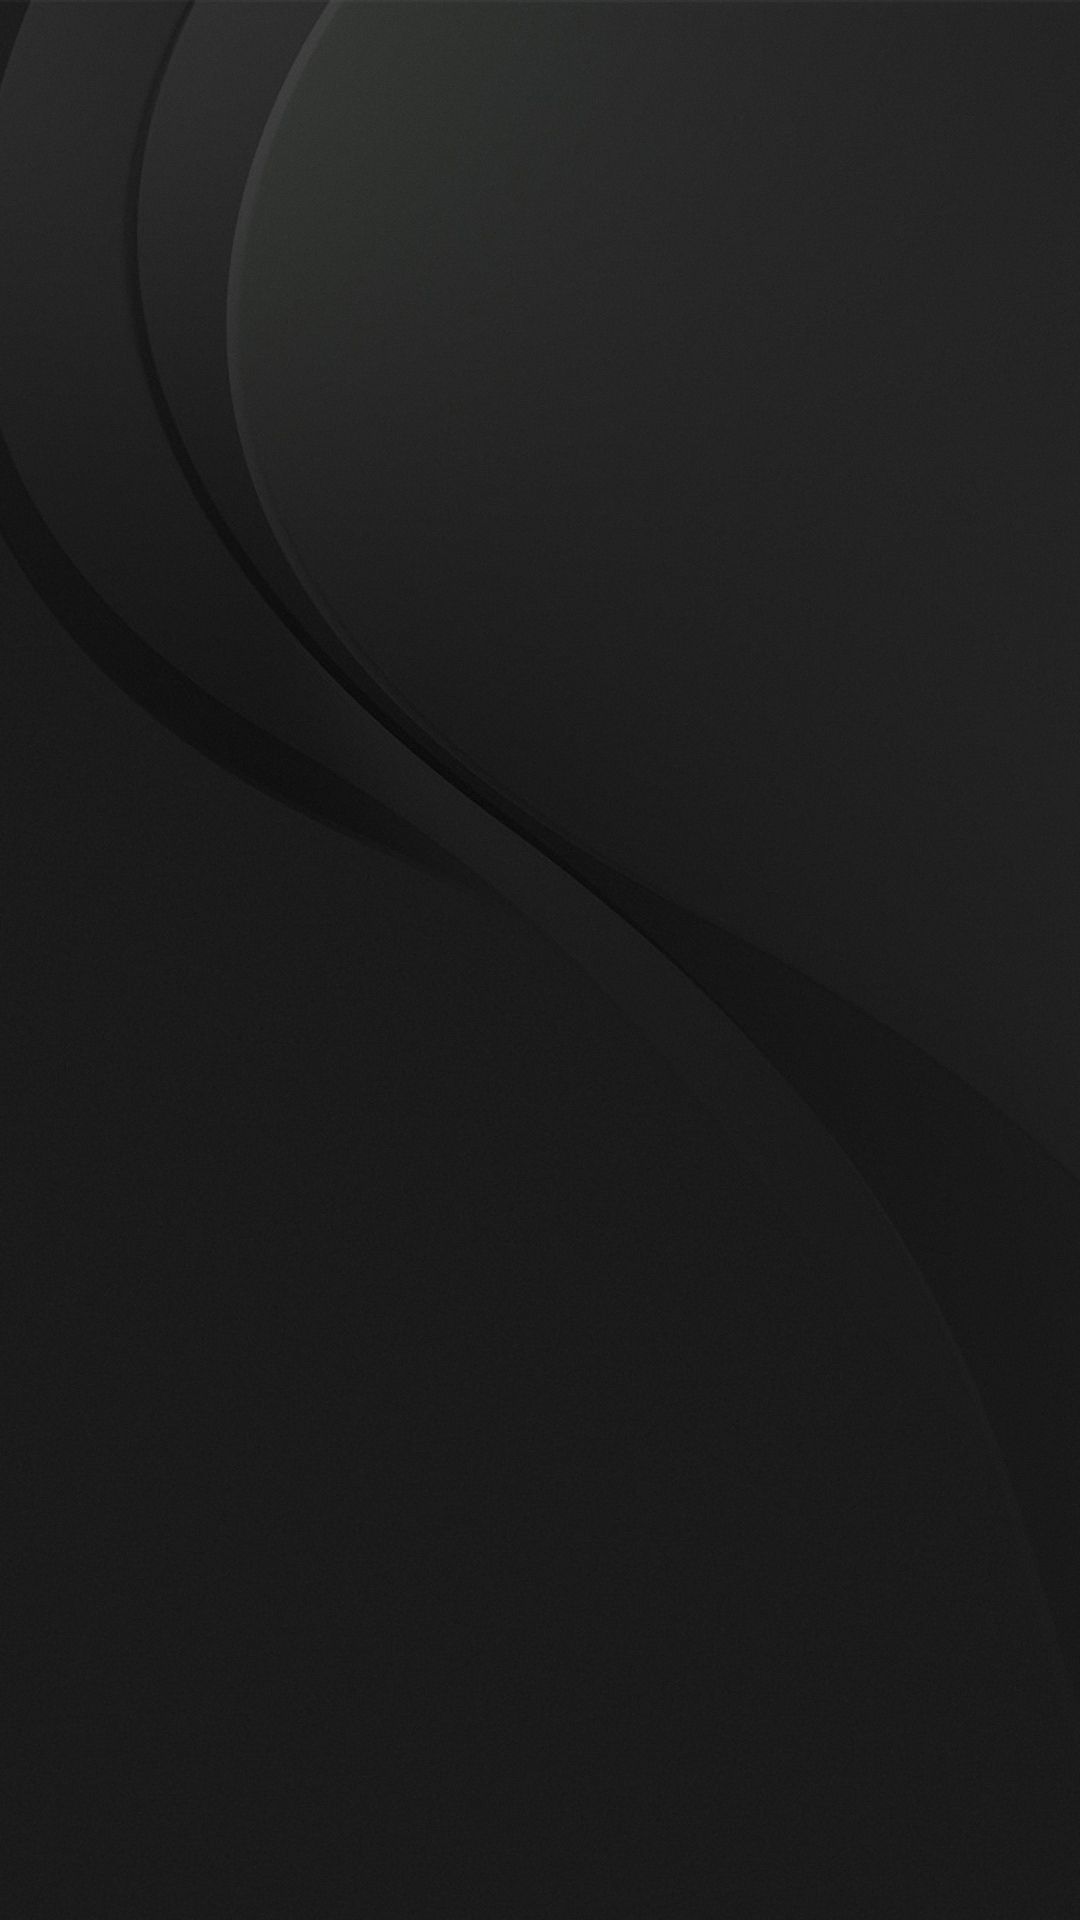 1080x1920 Wallpapers Black Group (89+)